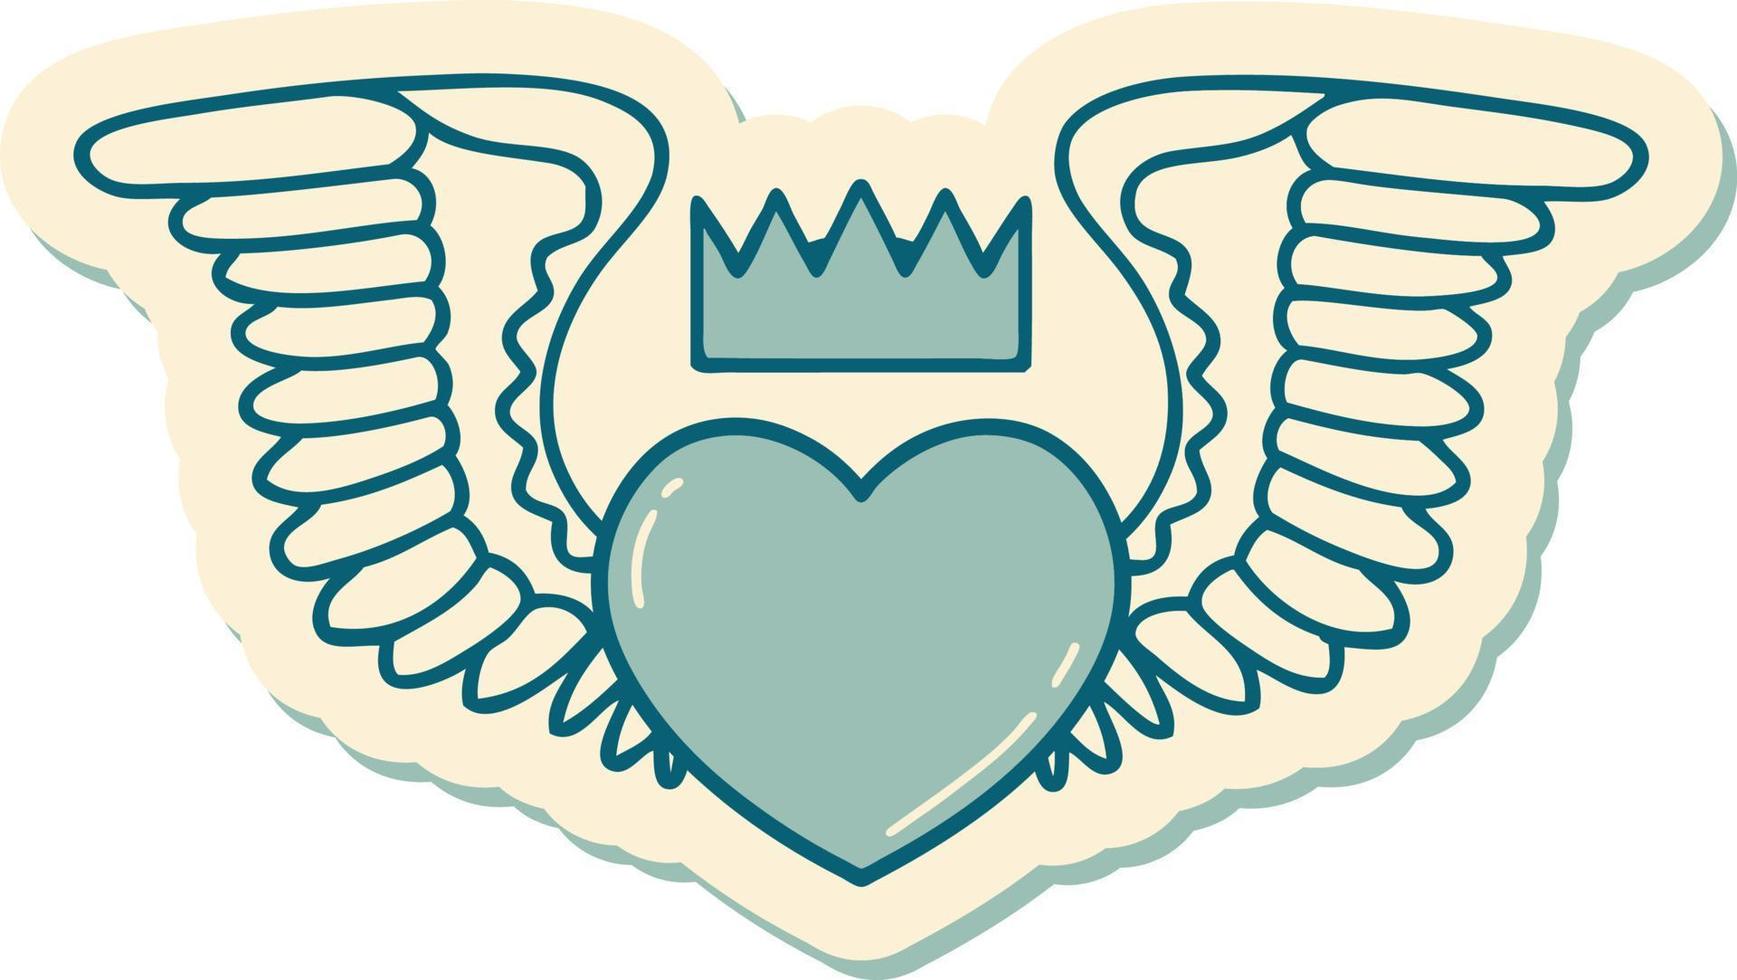 tattoo style sticker of a heart with wings vector